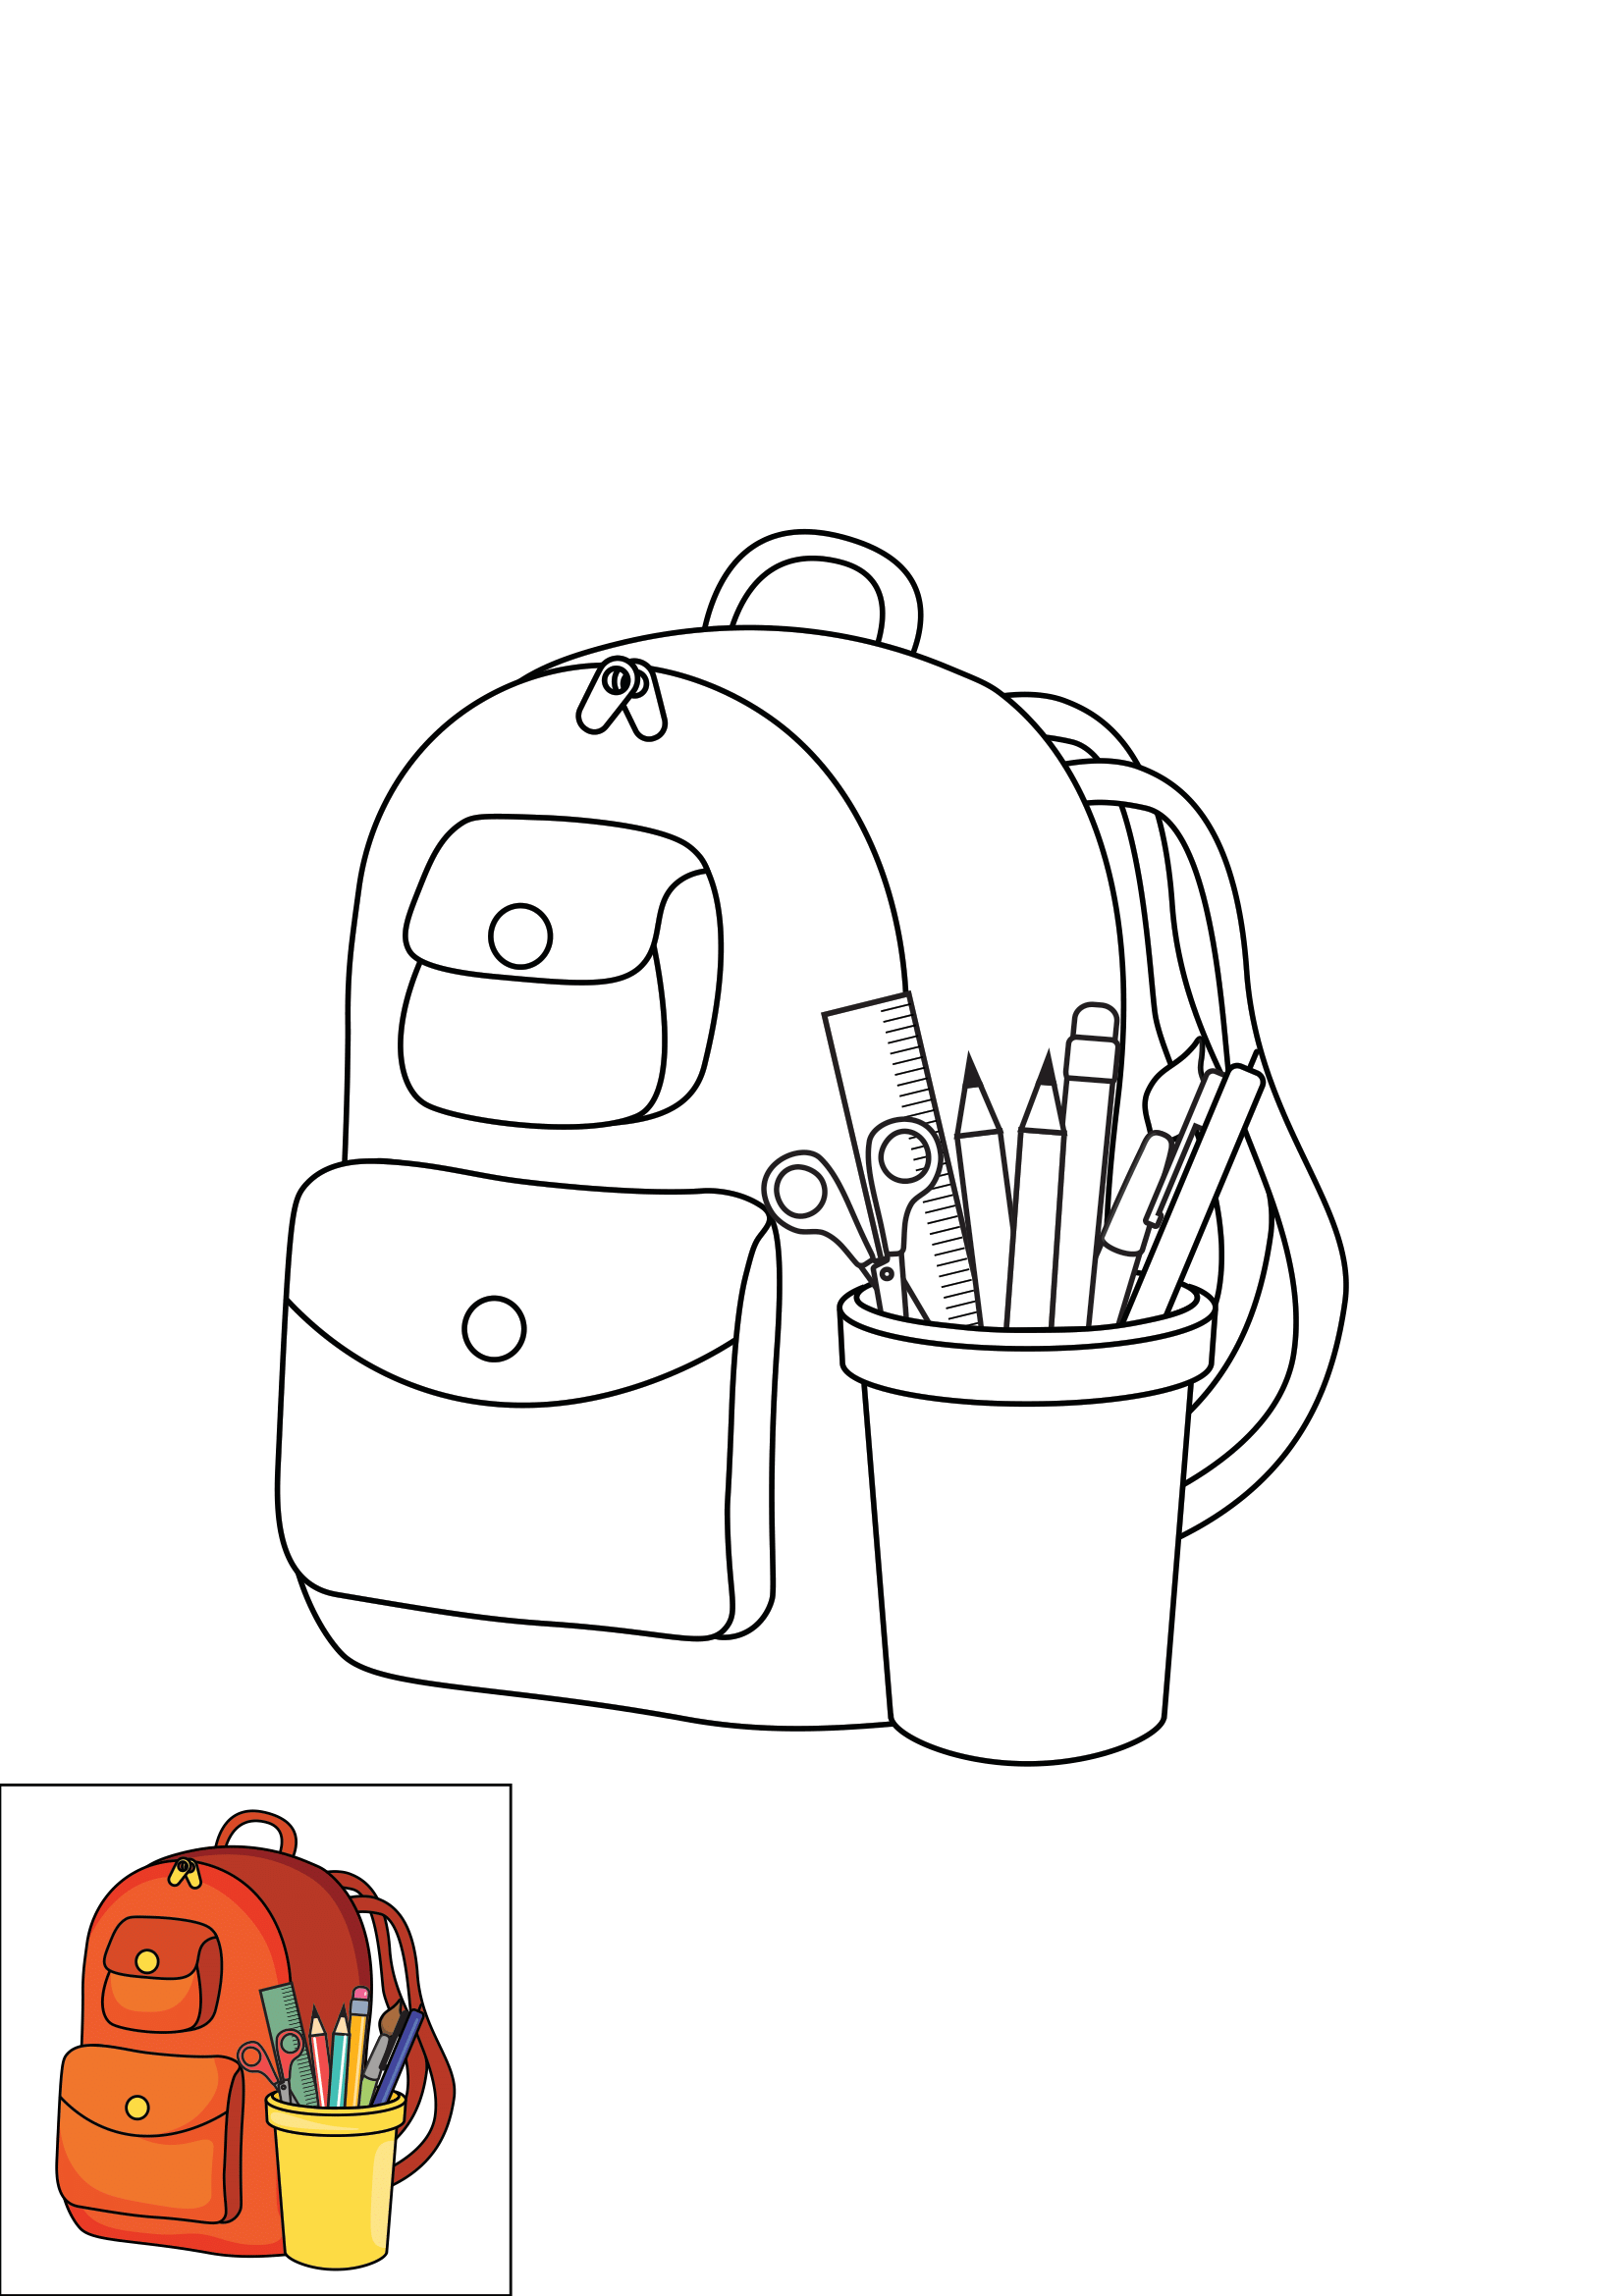 How to Draw School Supplies Step by Step Printable Color